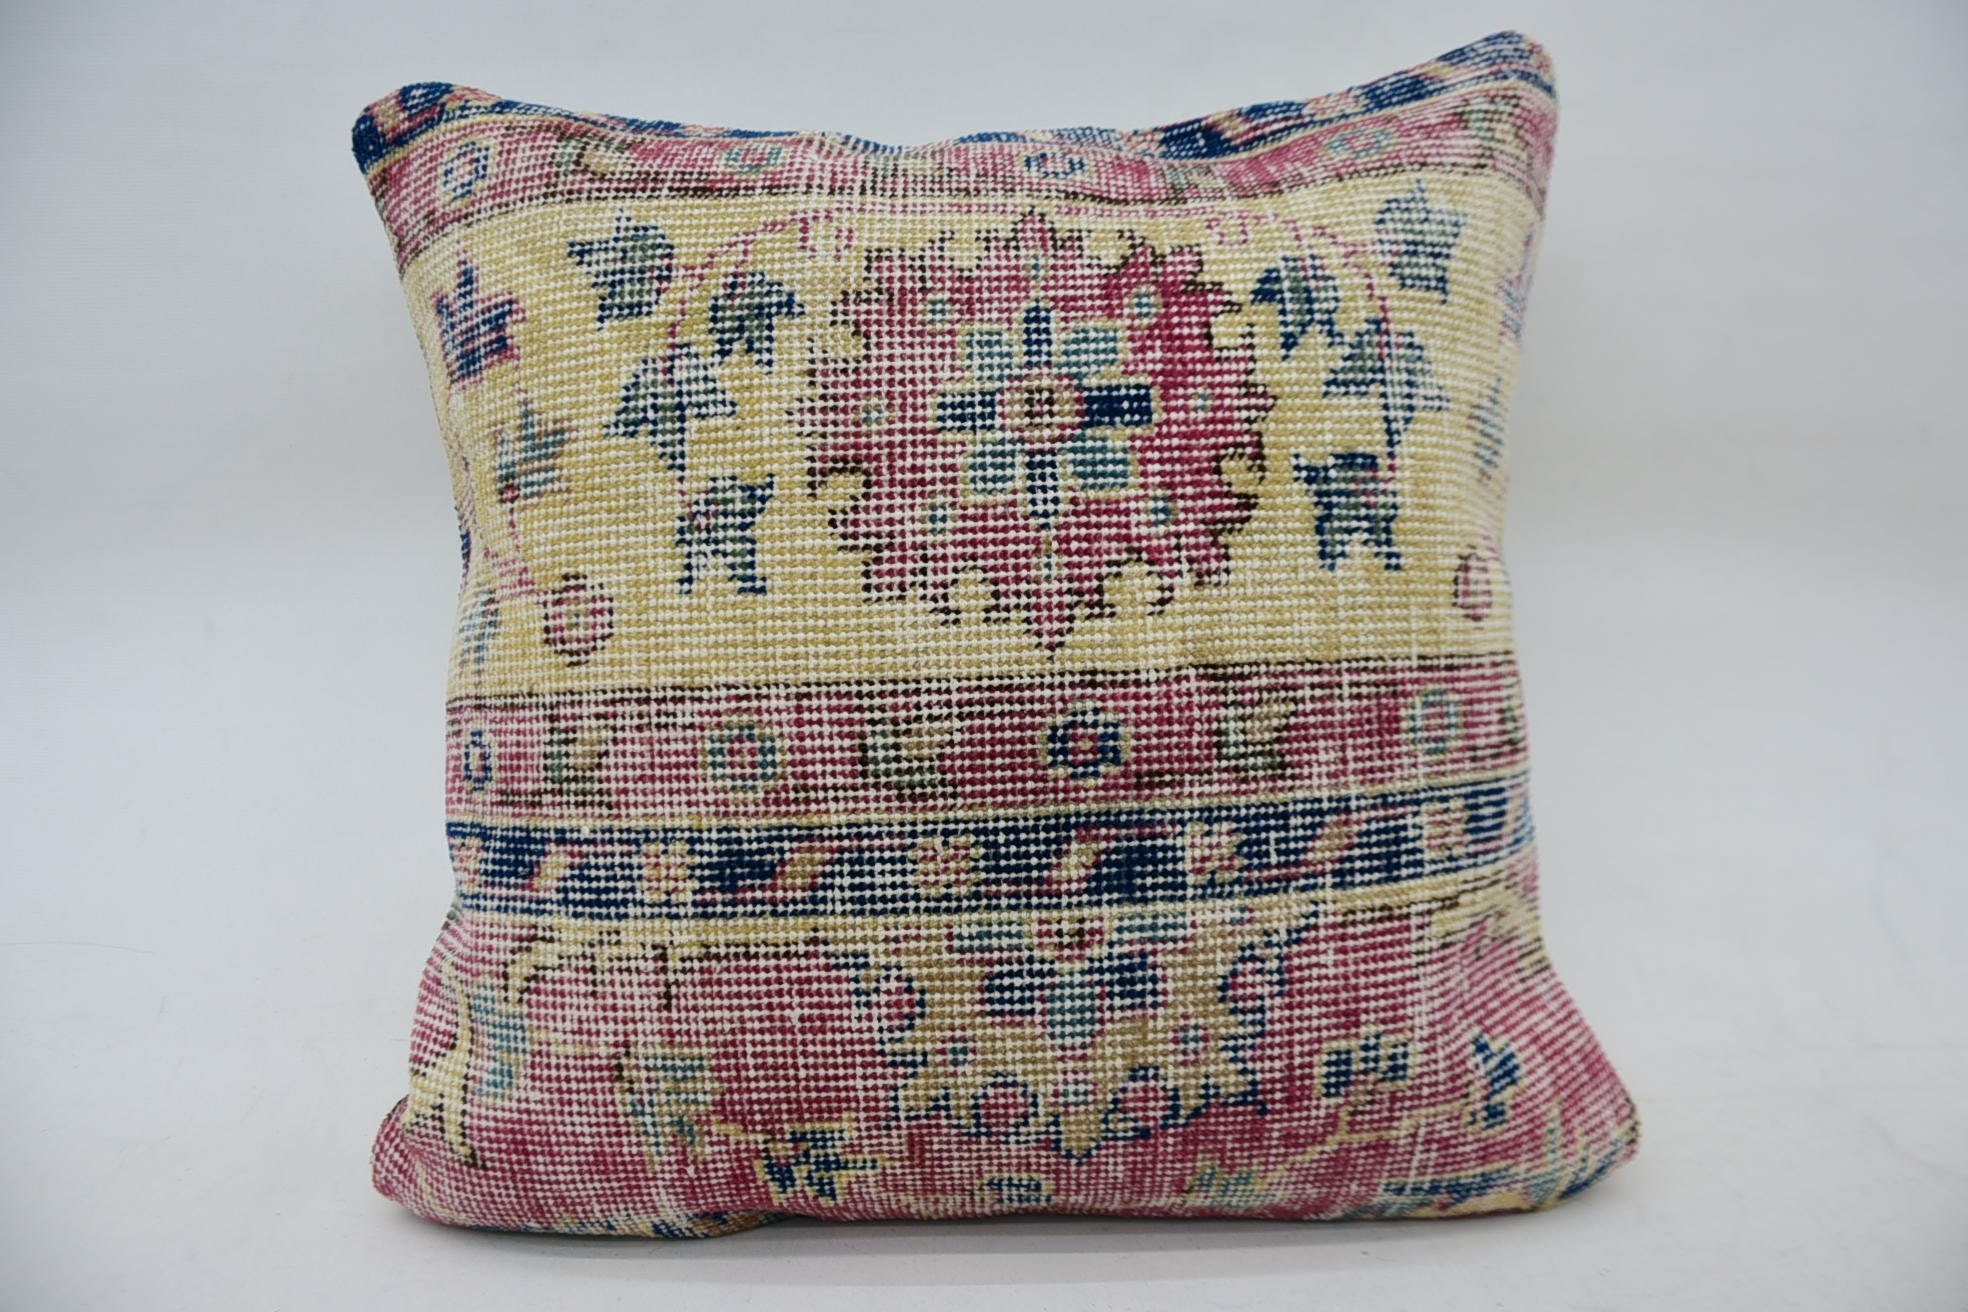 18"x18" Red Pillow Case, Turkish Pillow, Vintage Kilim Throw Pillow, Wool Kilim Pillow Pillow Cover, Pillow for Couch